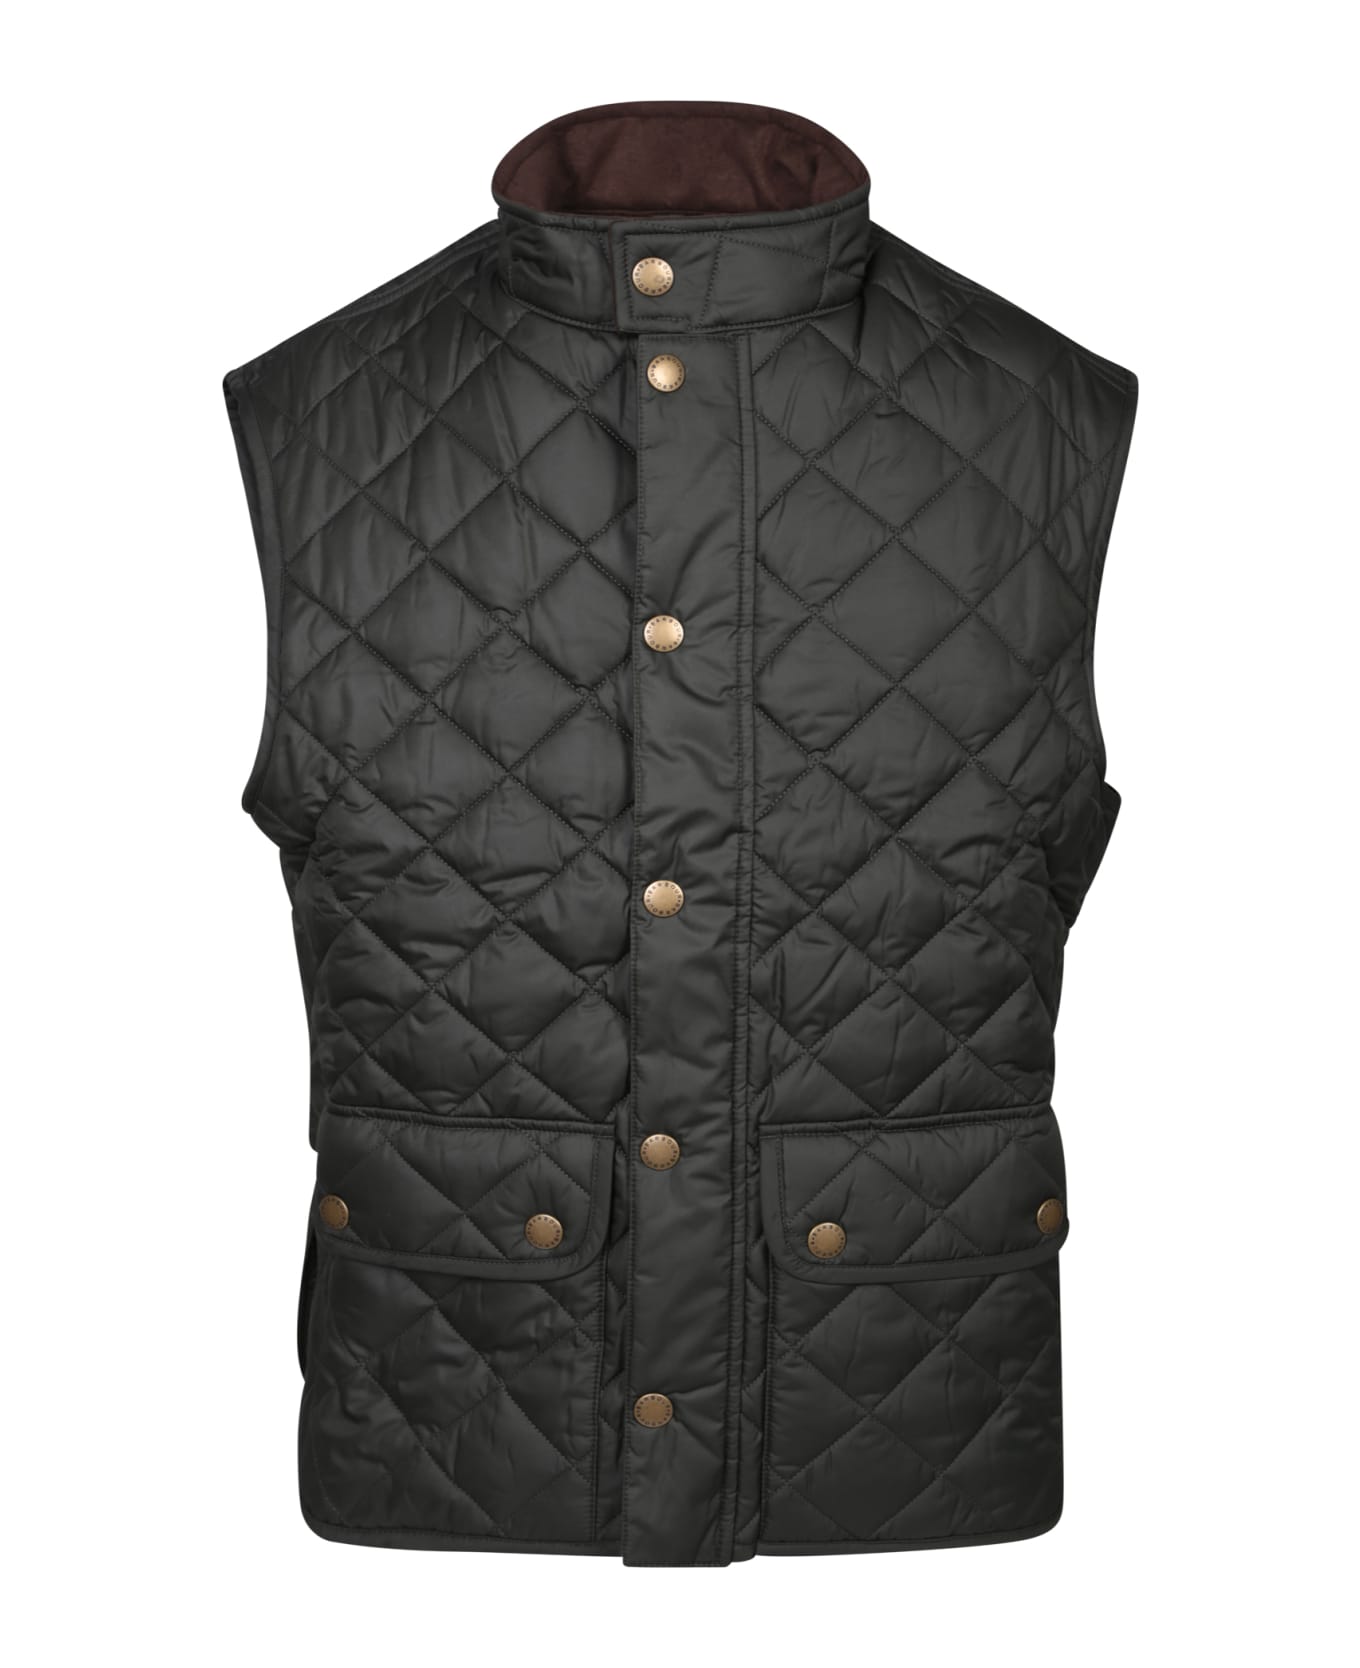 Barbour Lowerdale Military Green Vest - Green